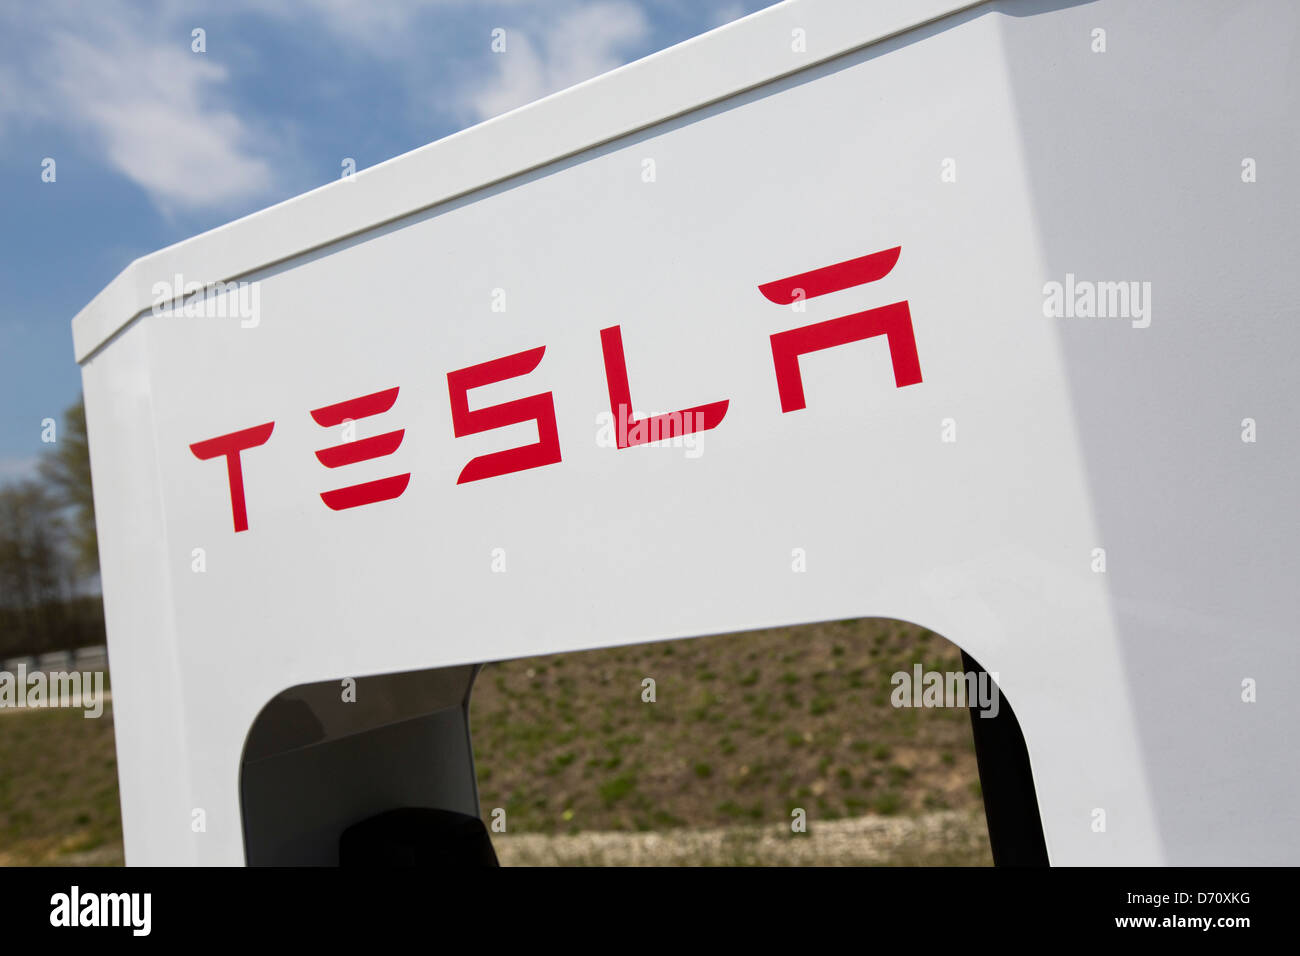 A Tesla electric vehicle Supercharging Station along Interstate 95 in Delaware.  Stock Photo